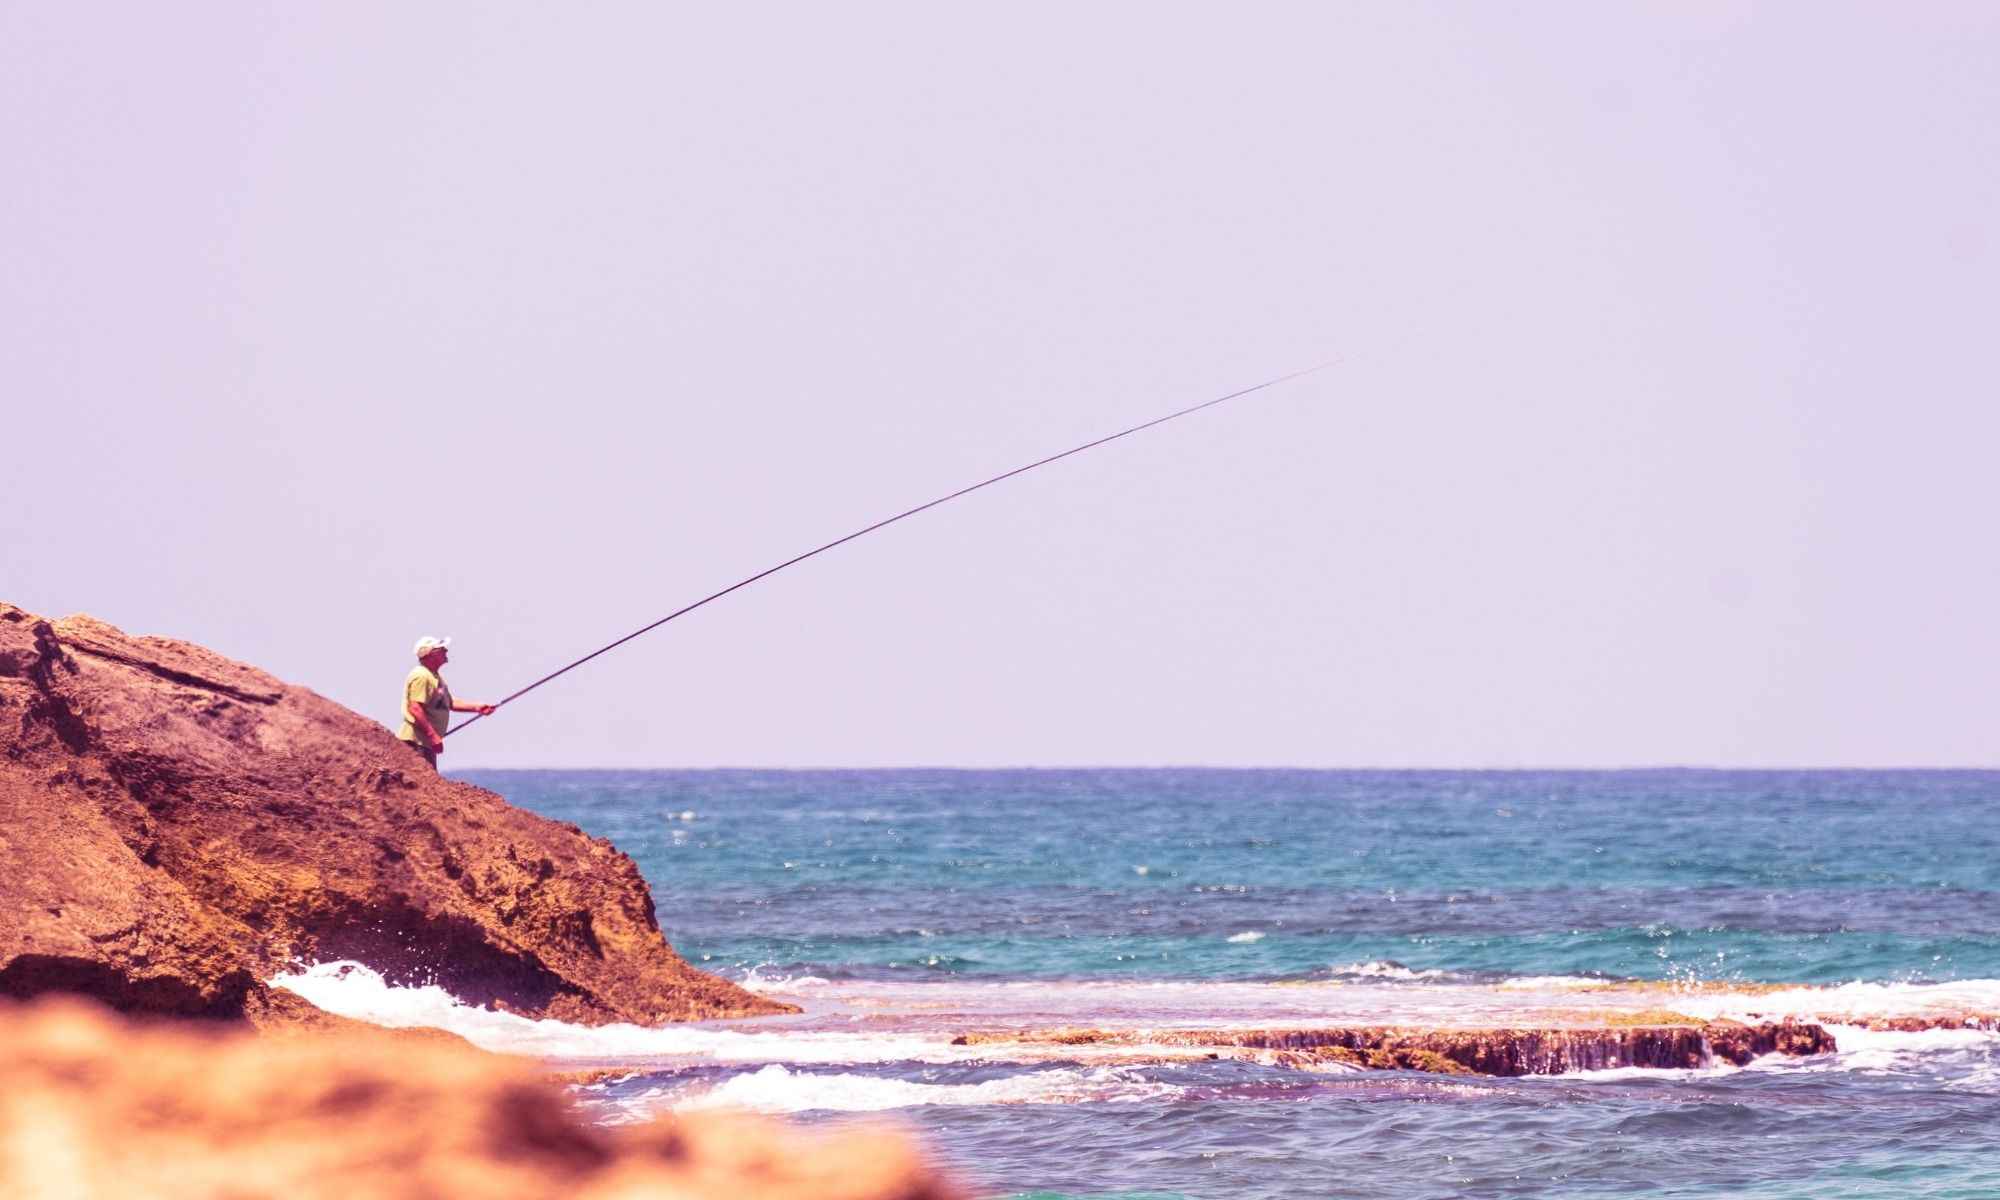 Bank Fishing 101: Tips and Tricks to Successfully Catch Fish from